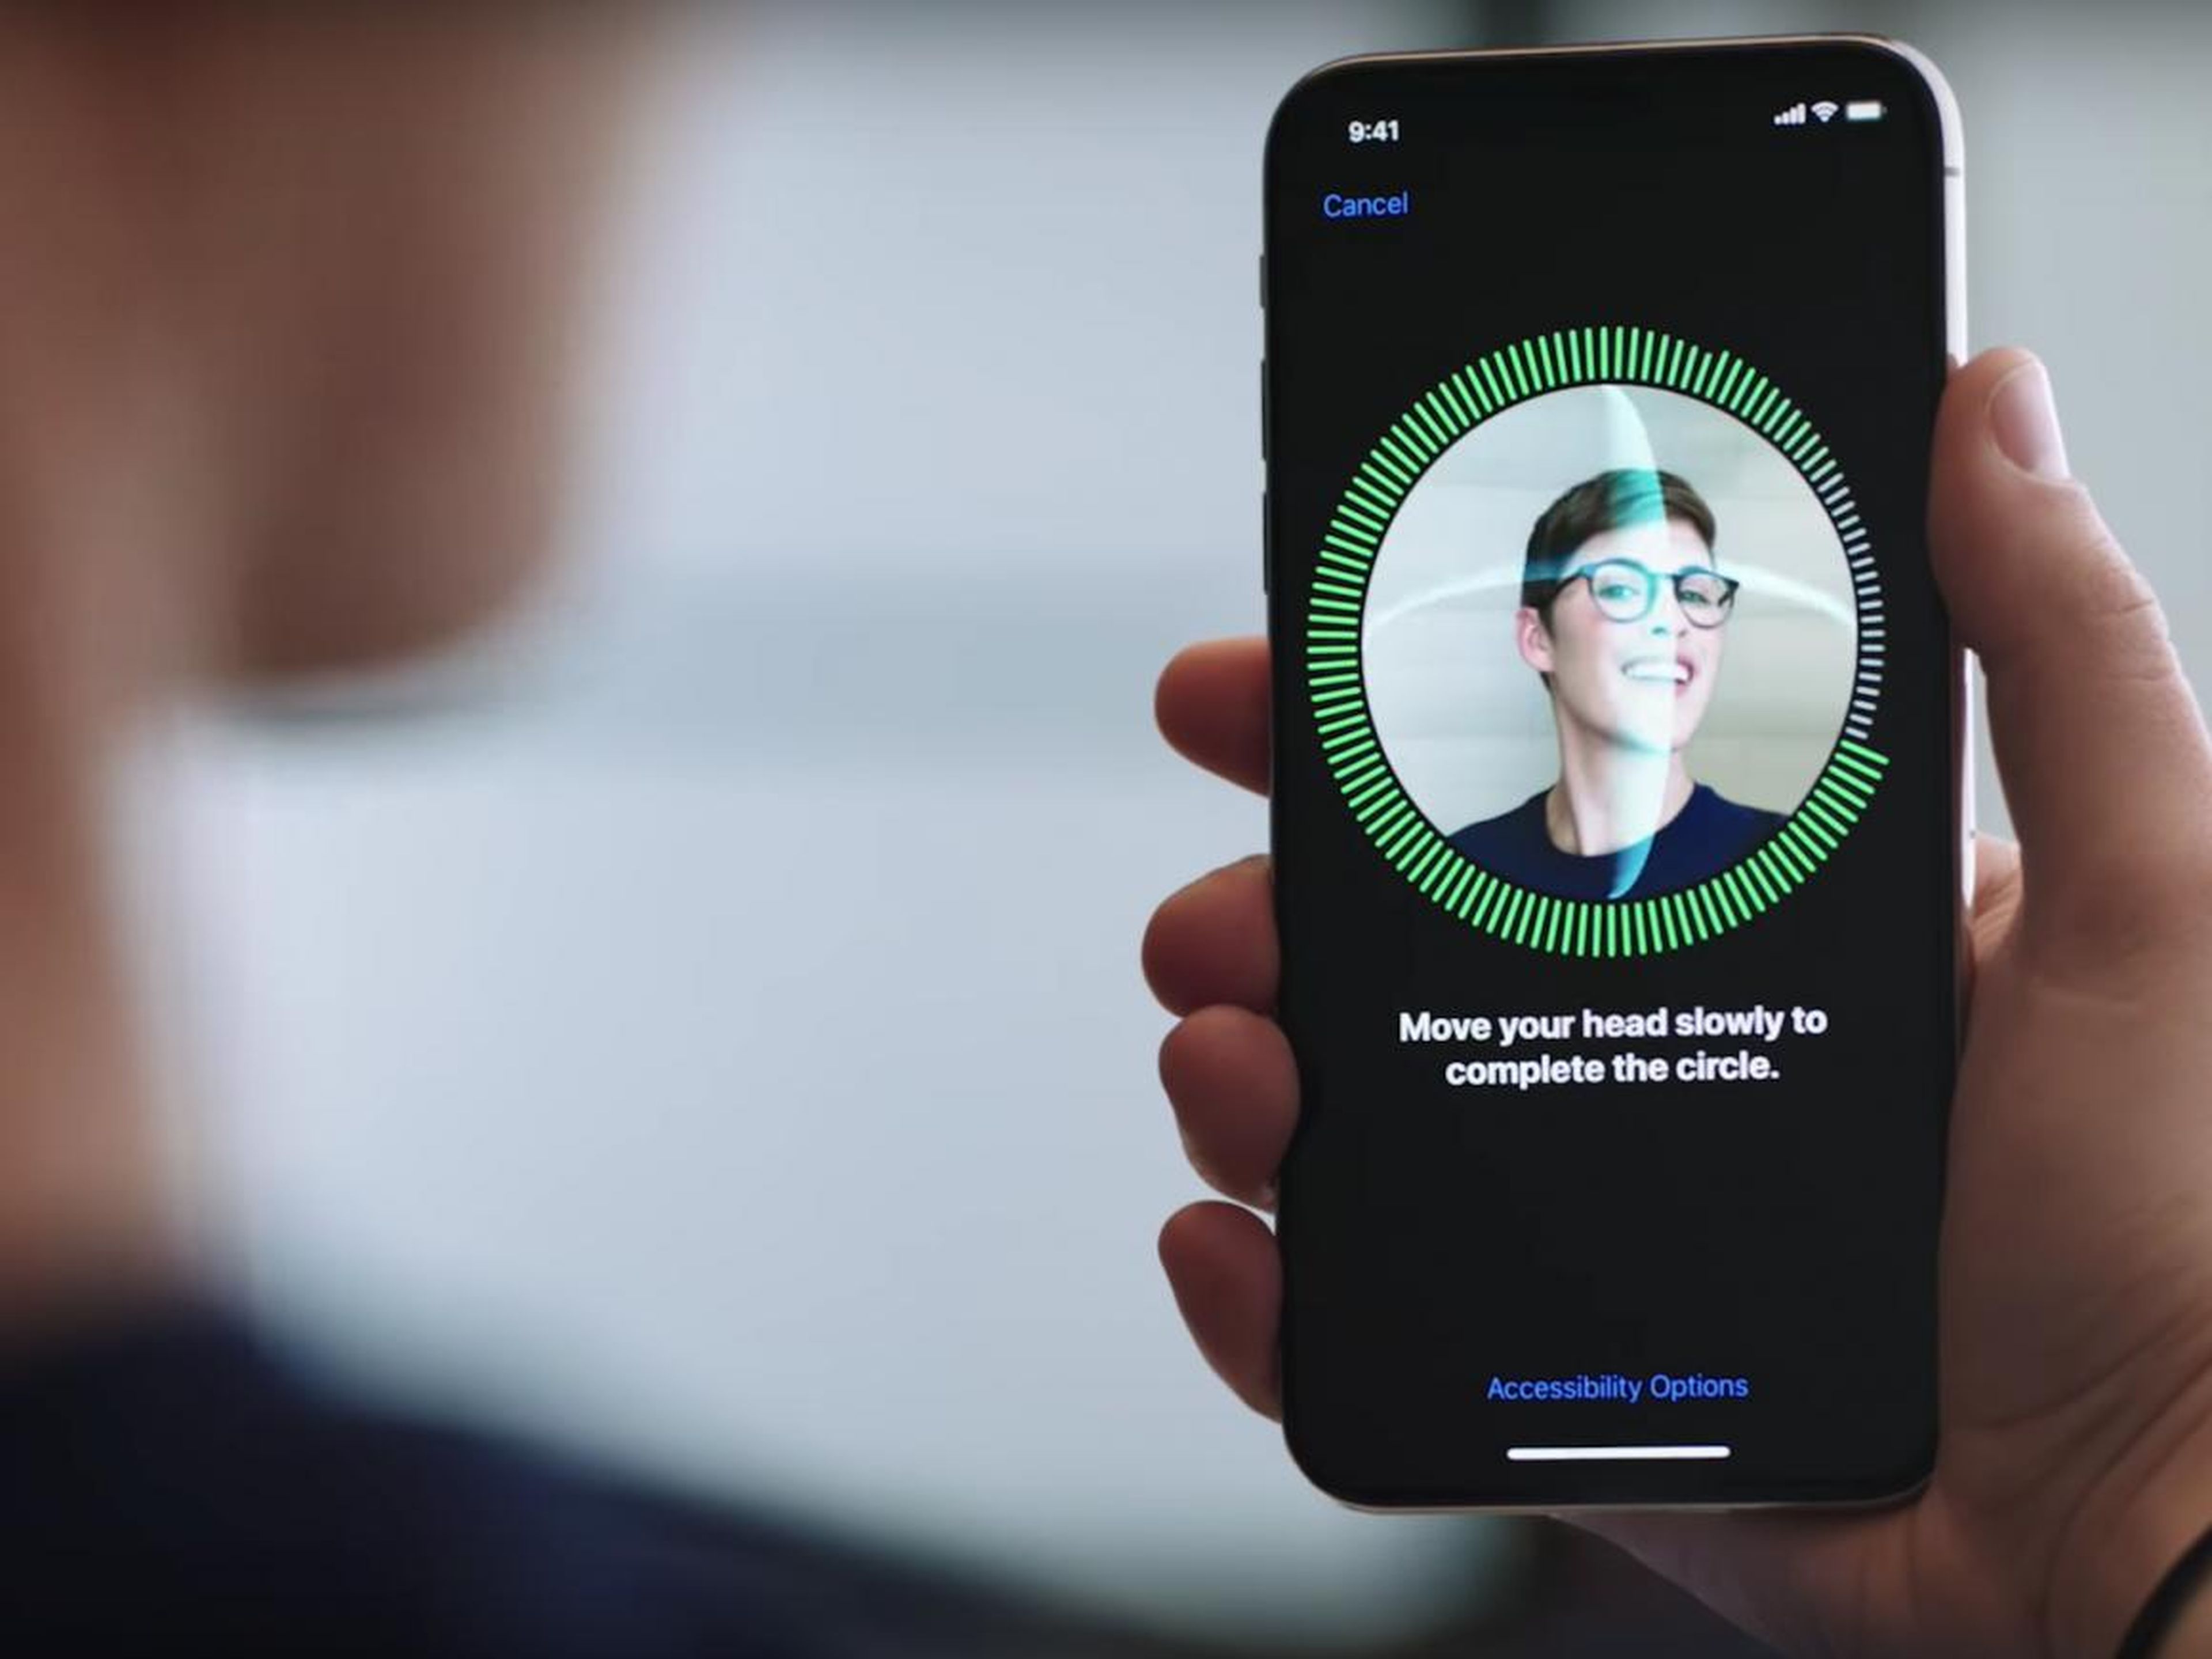 Apple's iPhone X uses its special "TrueDepth" camera system to scan a user's face and securely log them in.